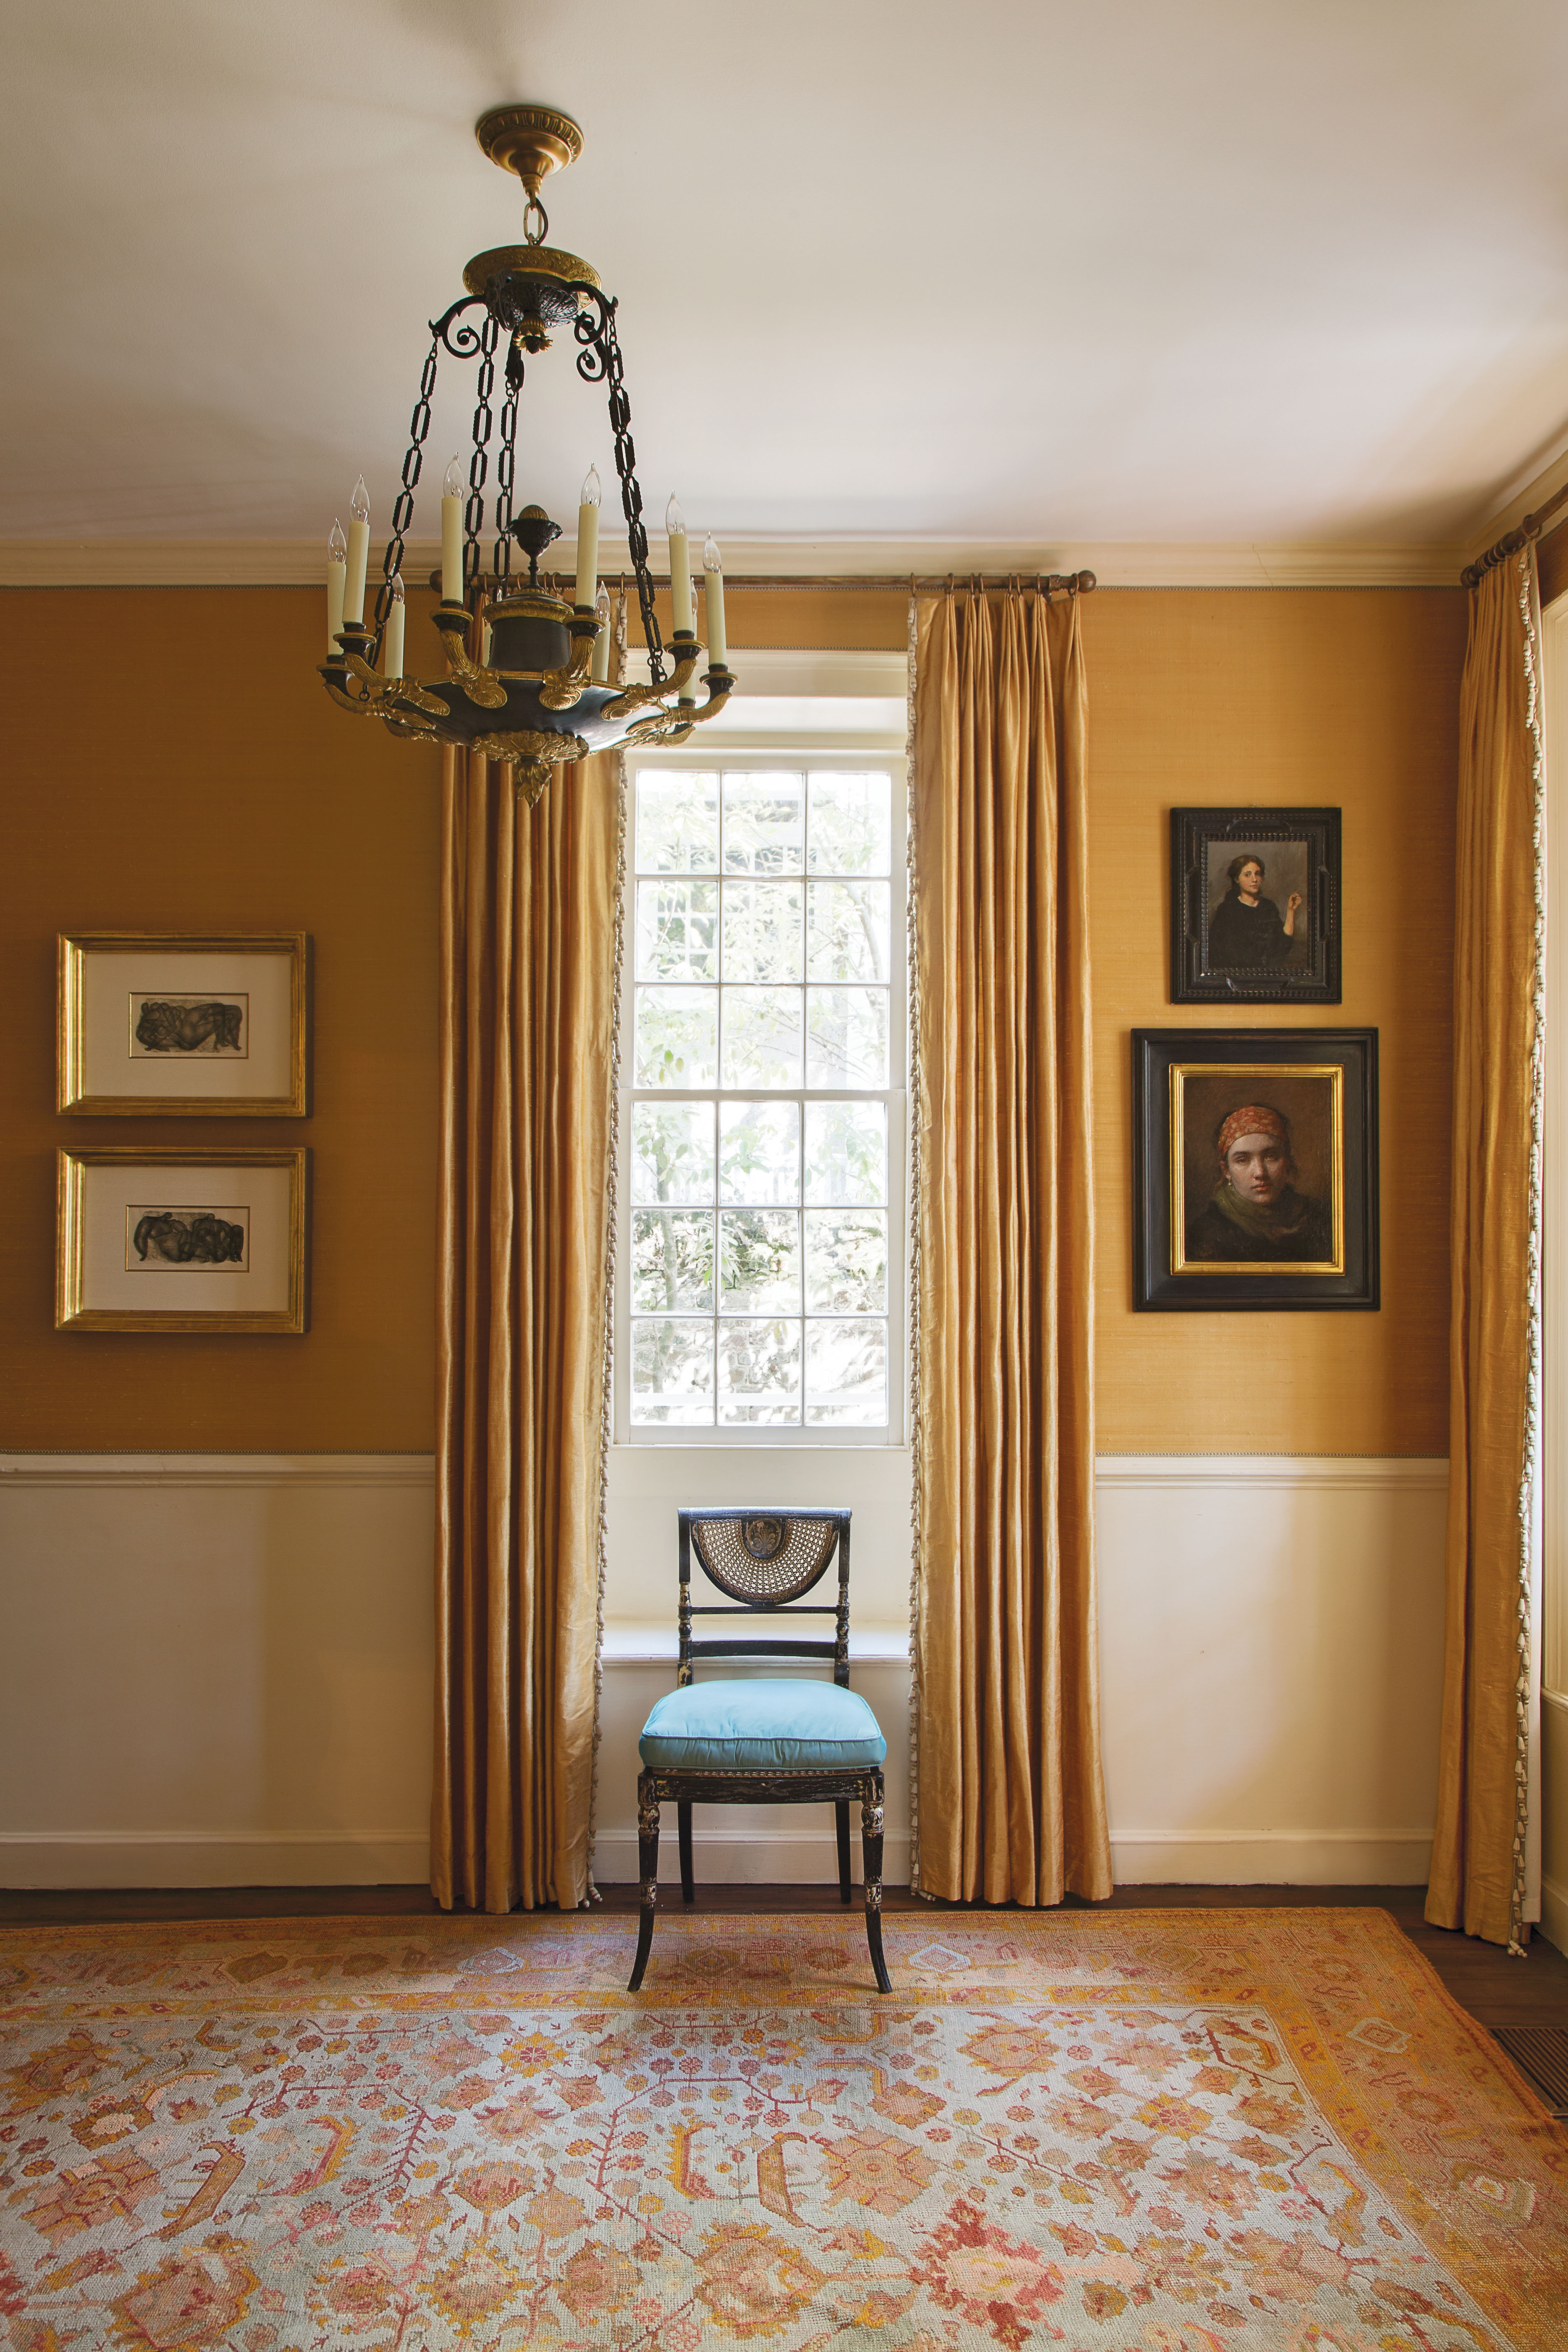 In the foyer, apricot-hued silk wall coverings and coordinating curtains provide an elegant backdrop for a pair of works by mid-century German expressionist painter Otto Neumann and portraits by contemporary classical realists Daniela Astone and Charles Weed.